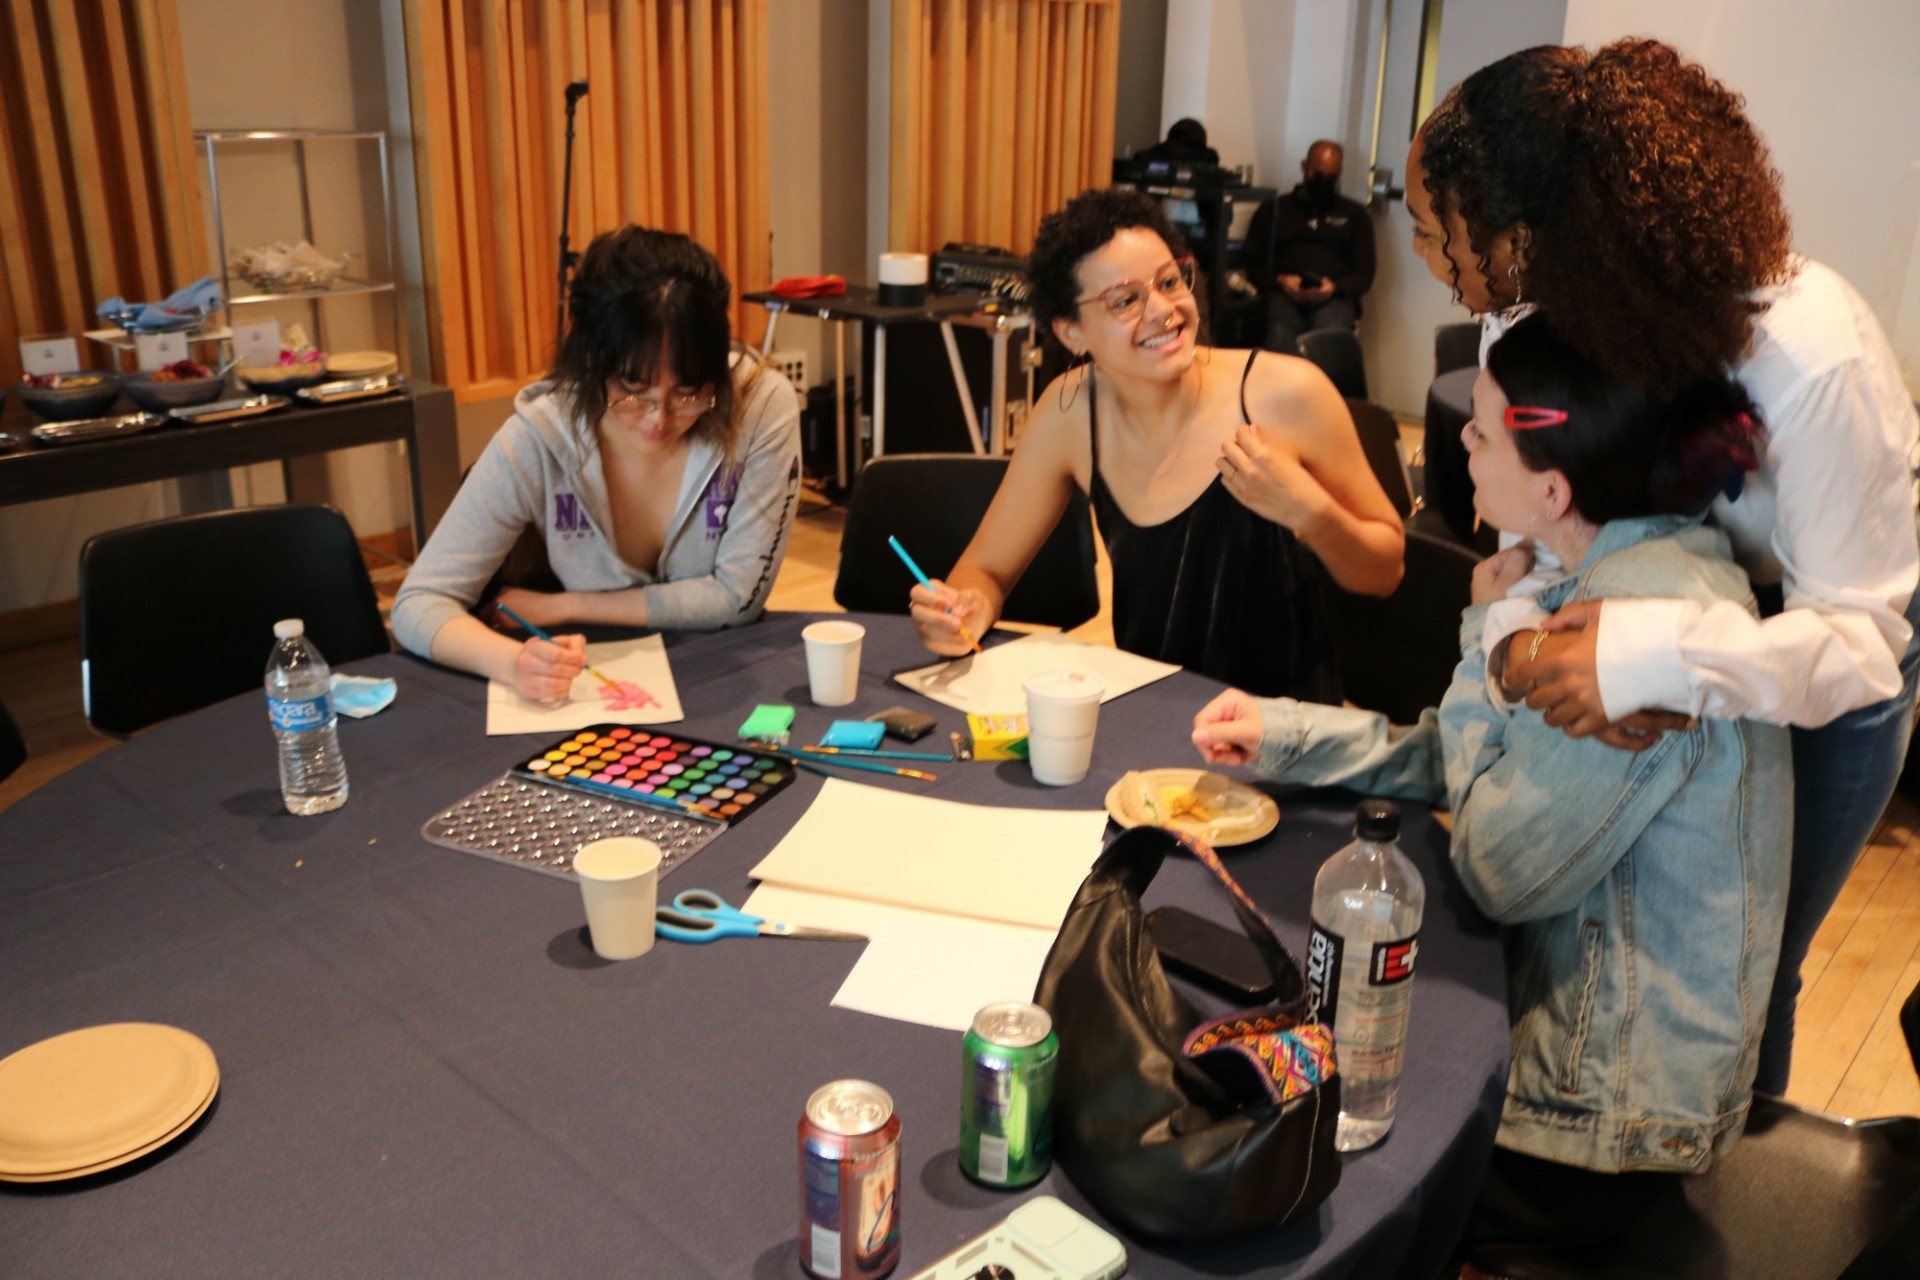 Image of audience members painting arts and crafts